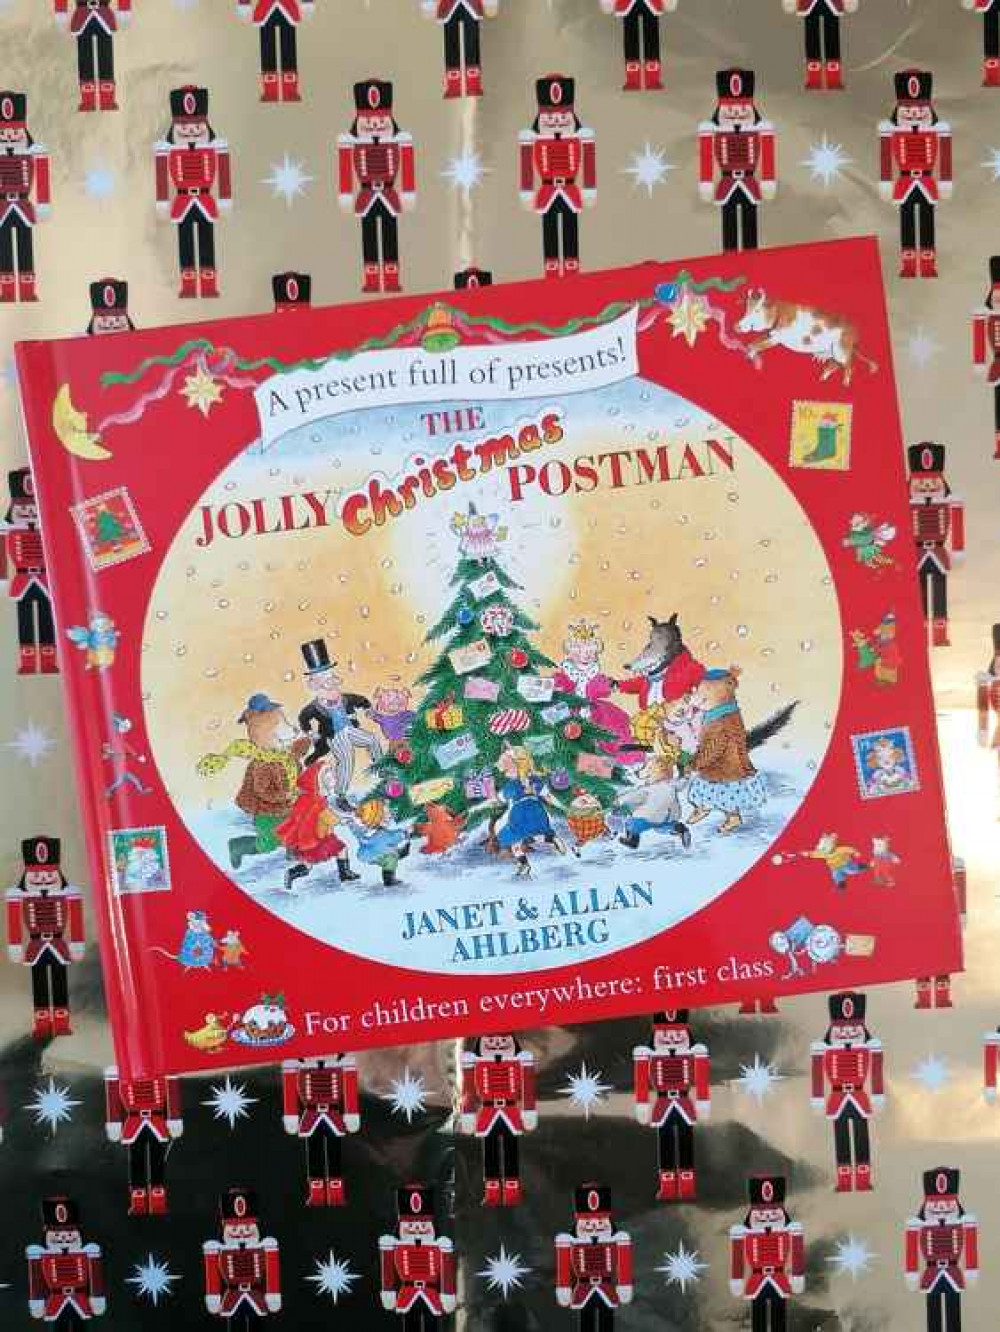 Hitchin Library and Nub News: A countdown to Christmas in festive book favourites!